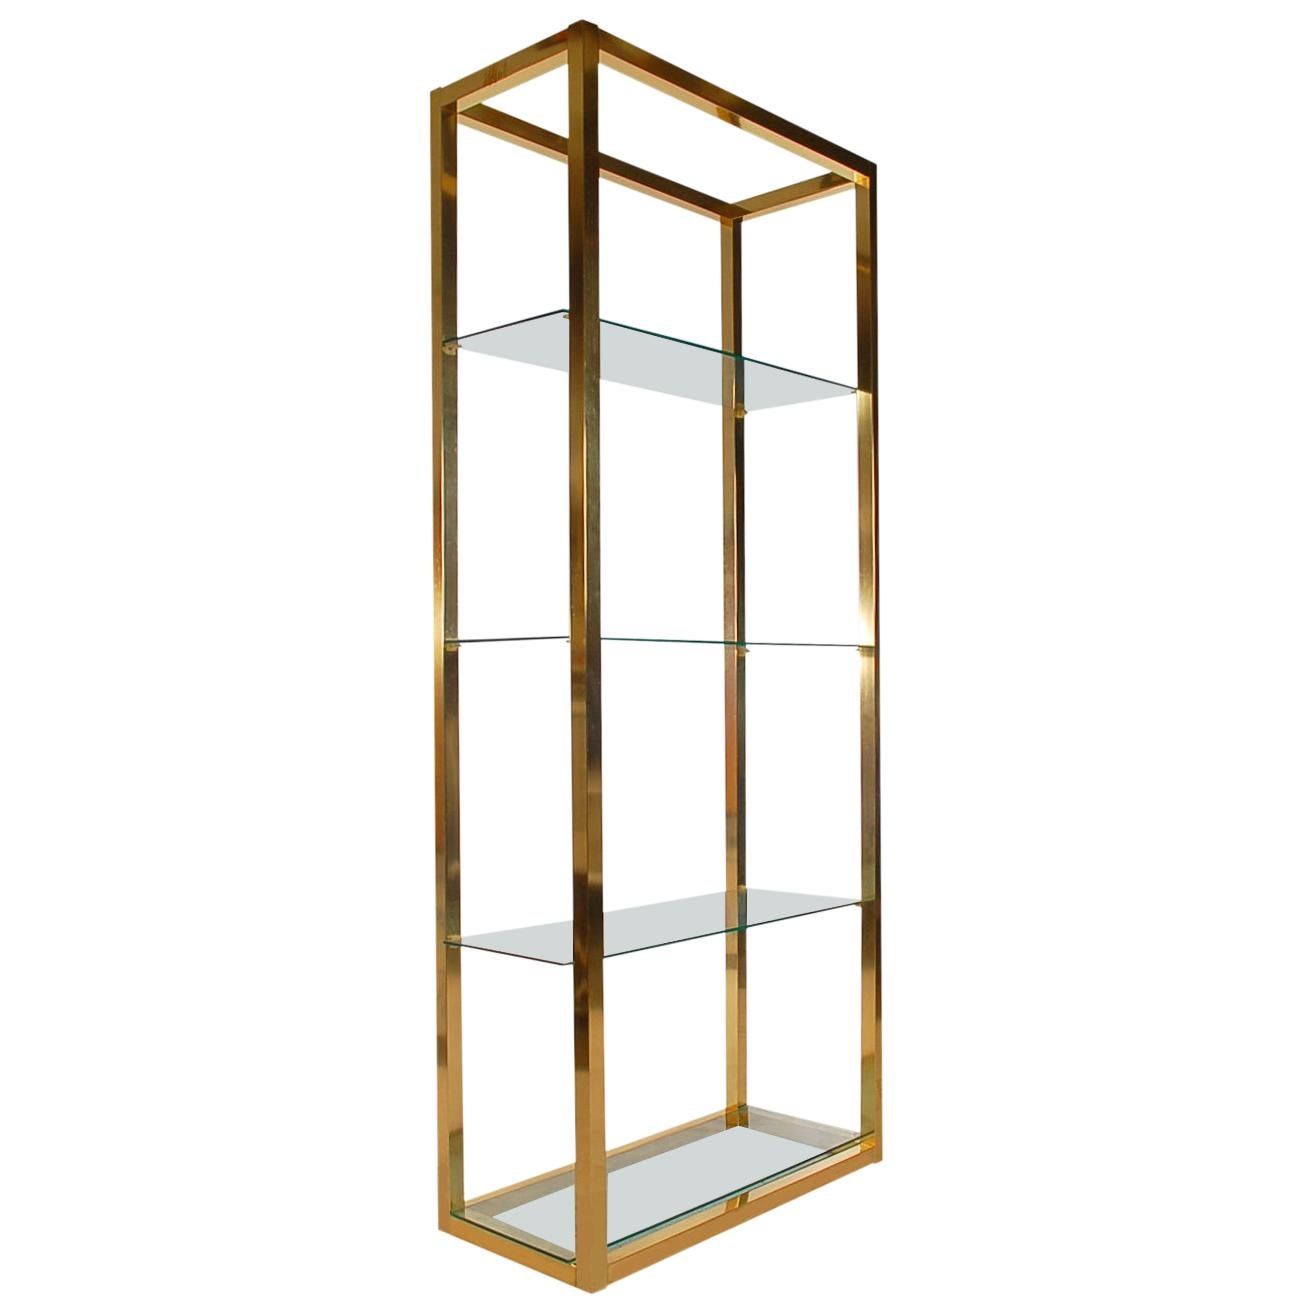 Hollywood Regency Modern Brass and Glass Étagère, Wall Unit or Shelving Unit